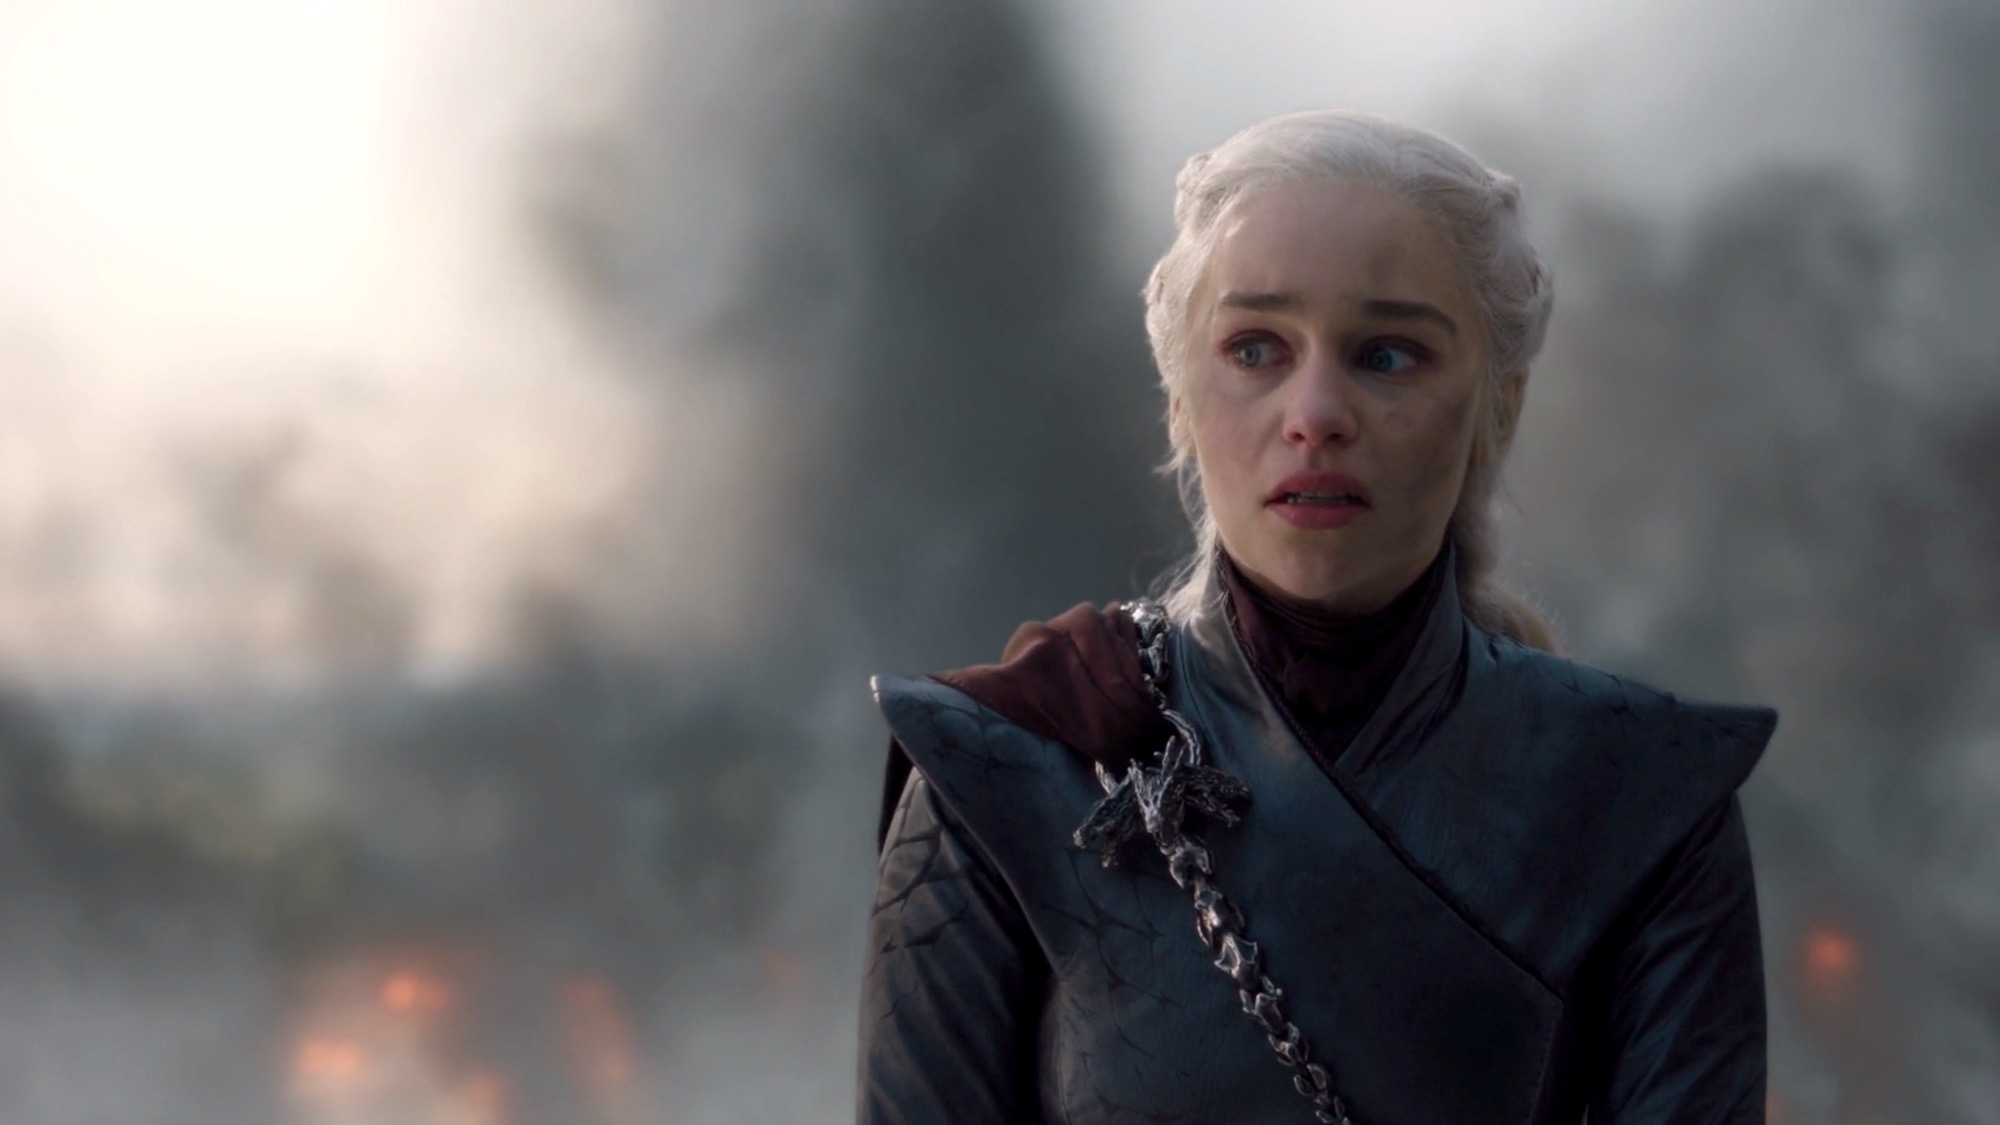 Daenerys in GAME OF THRONES 8x05 - THE BELLS